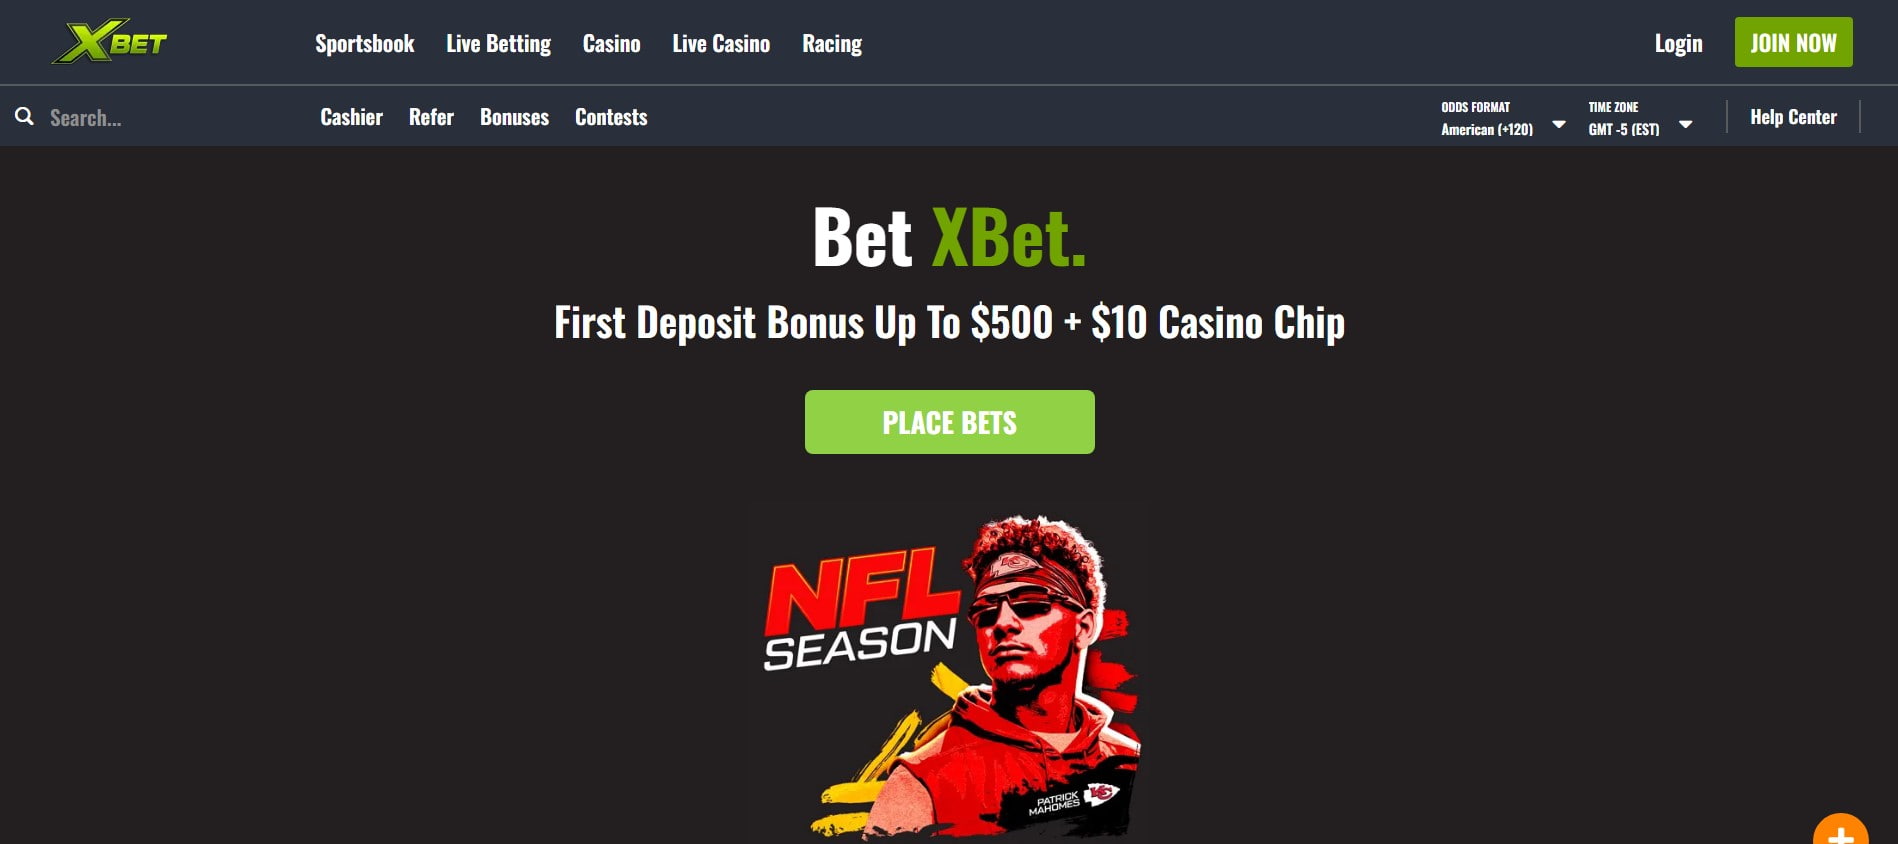 xbet homepage New Jersey